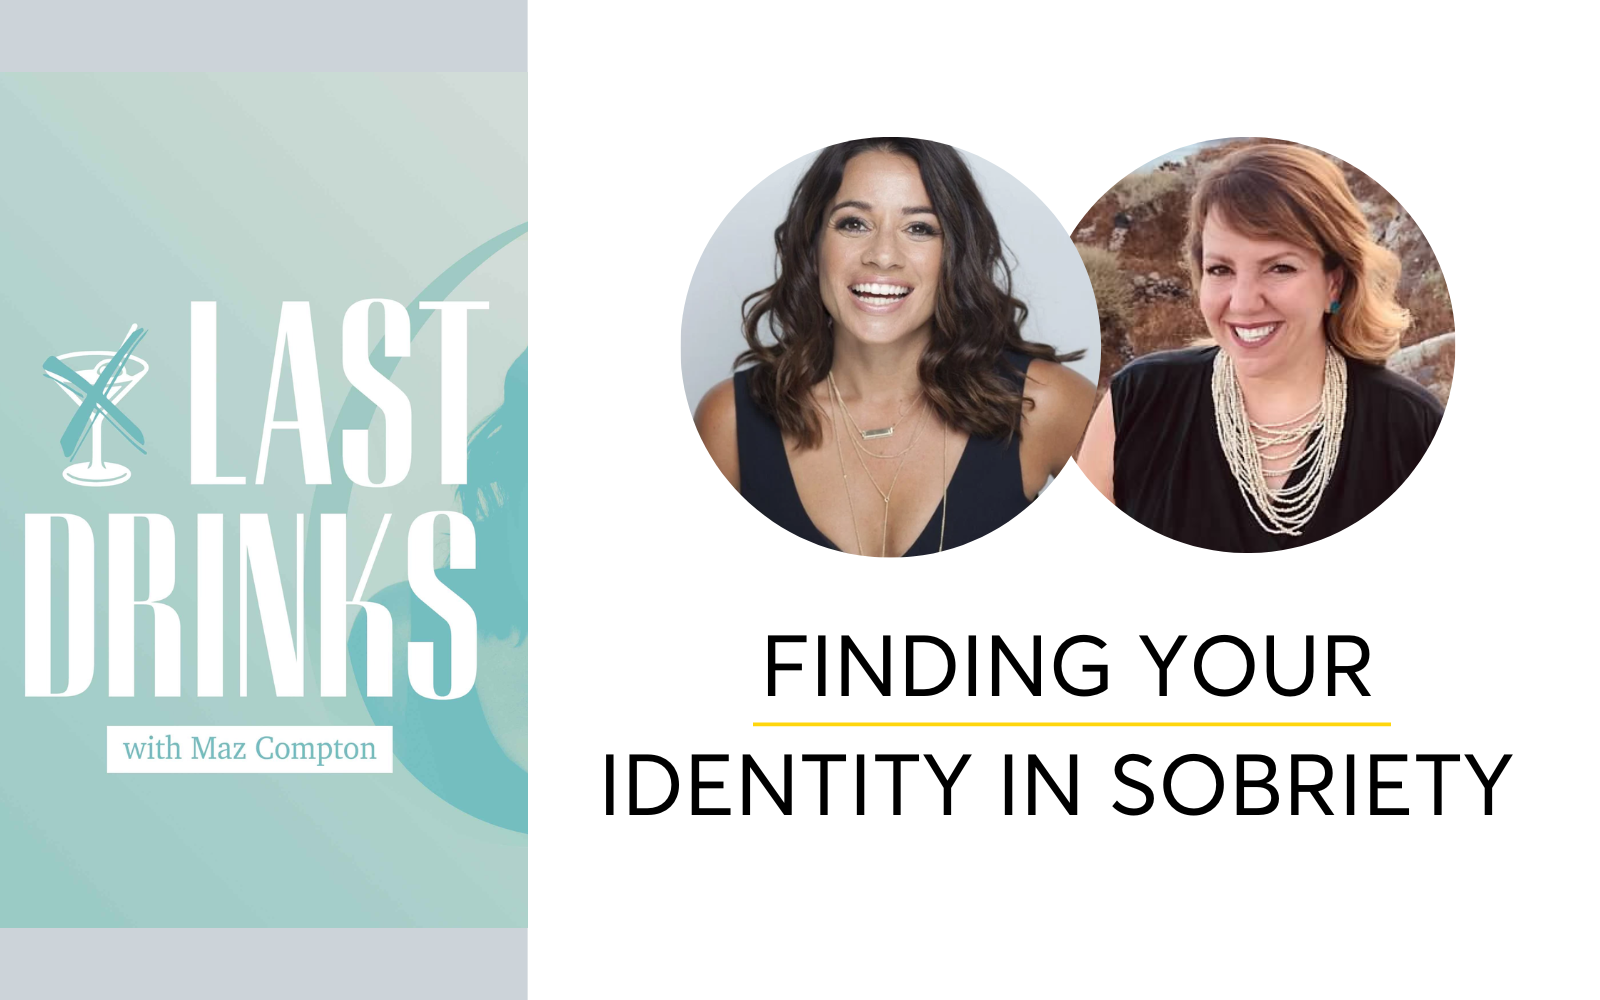 How To Find Your New Identity In Sobriety